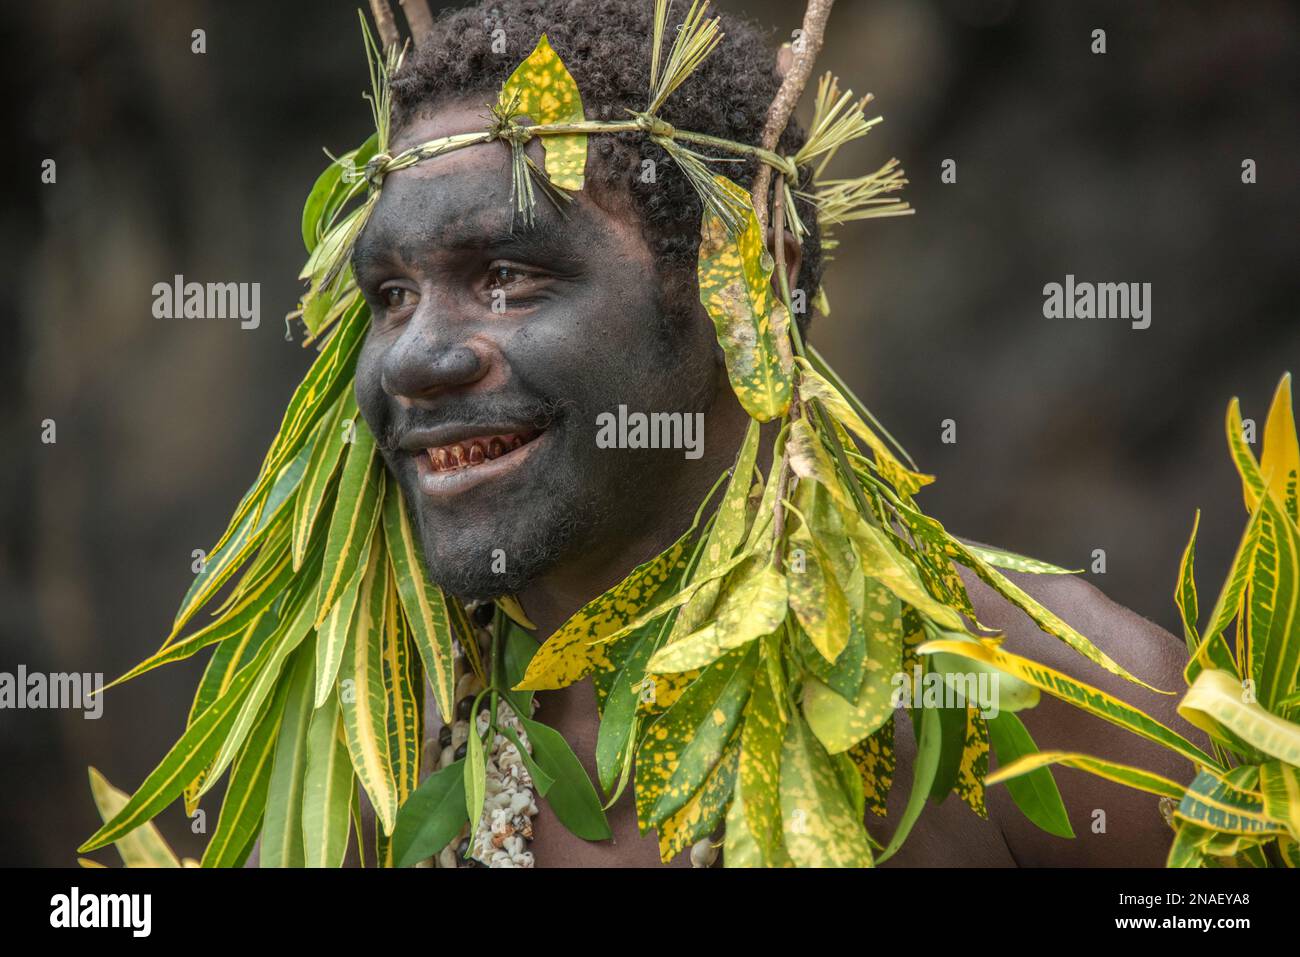 Man from the Jebo tribe, located in the Tufi area. The area is known for the tattooing of women, with each tribe having their own special design. Stock Photo